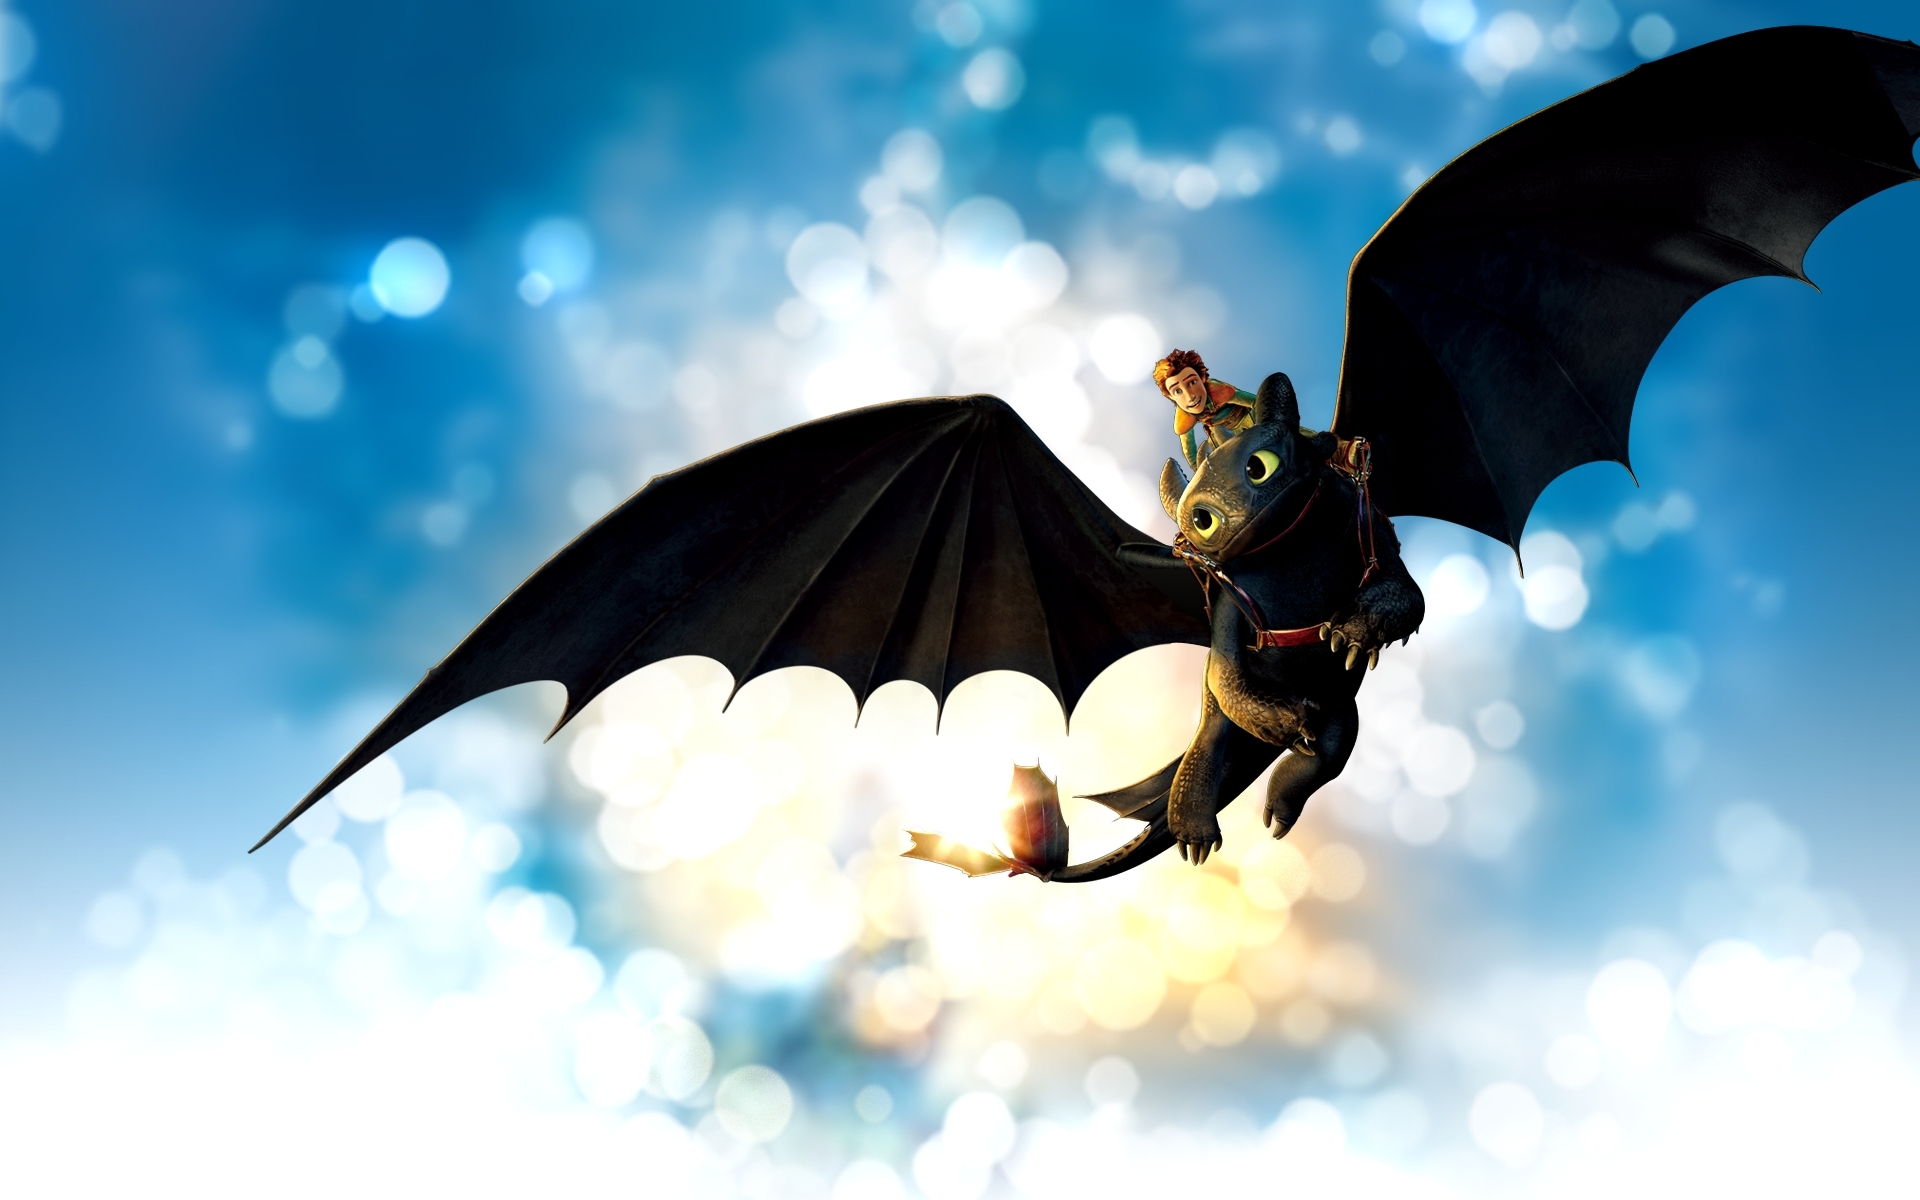 Toothless Wallpapers on WallpaperDog